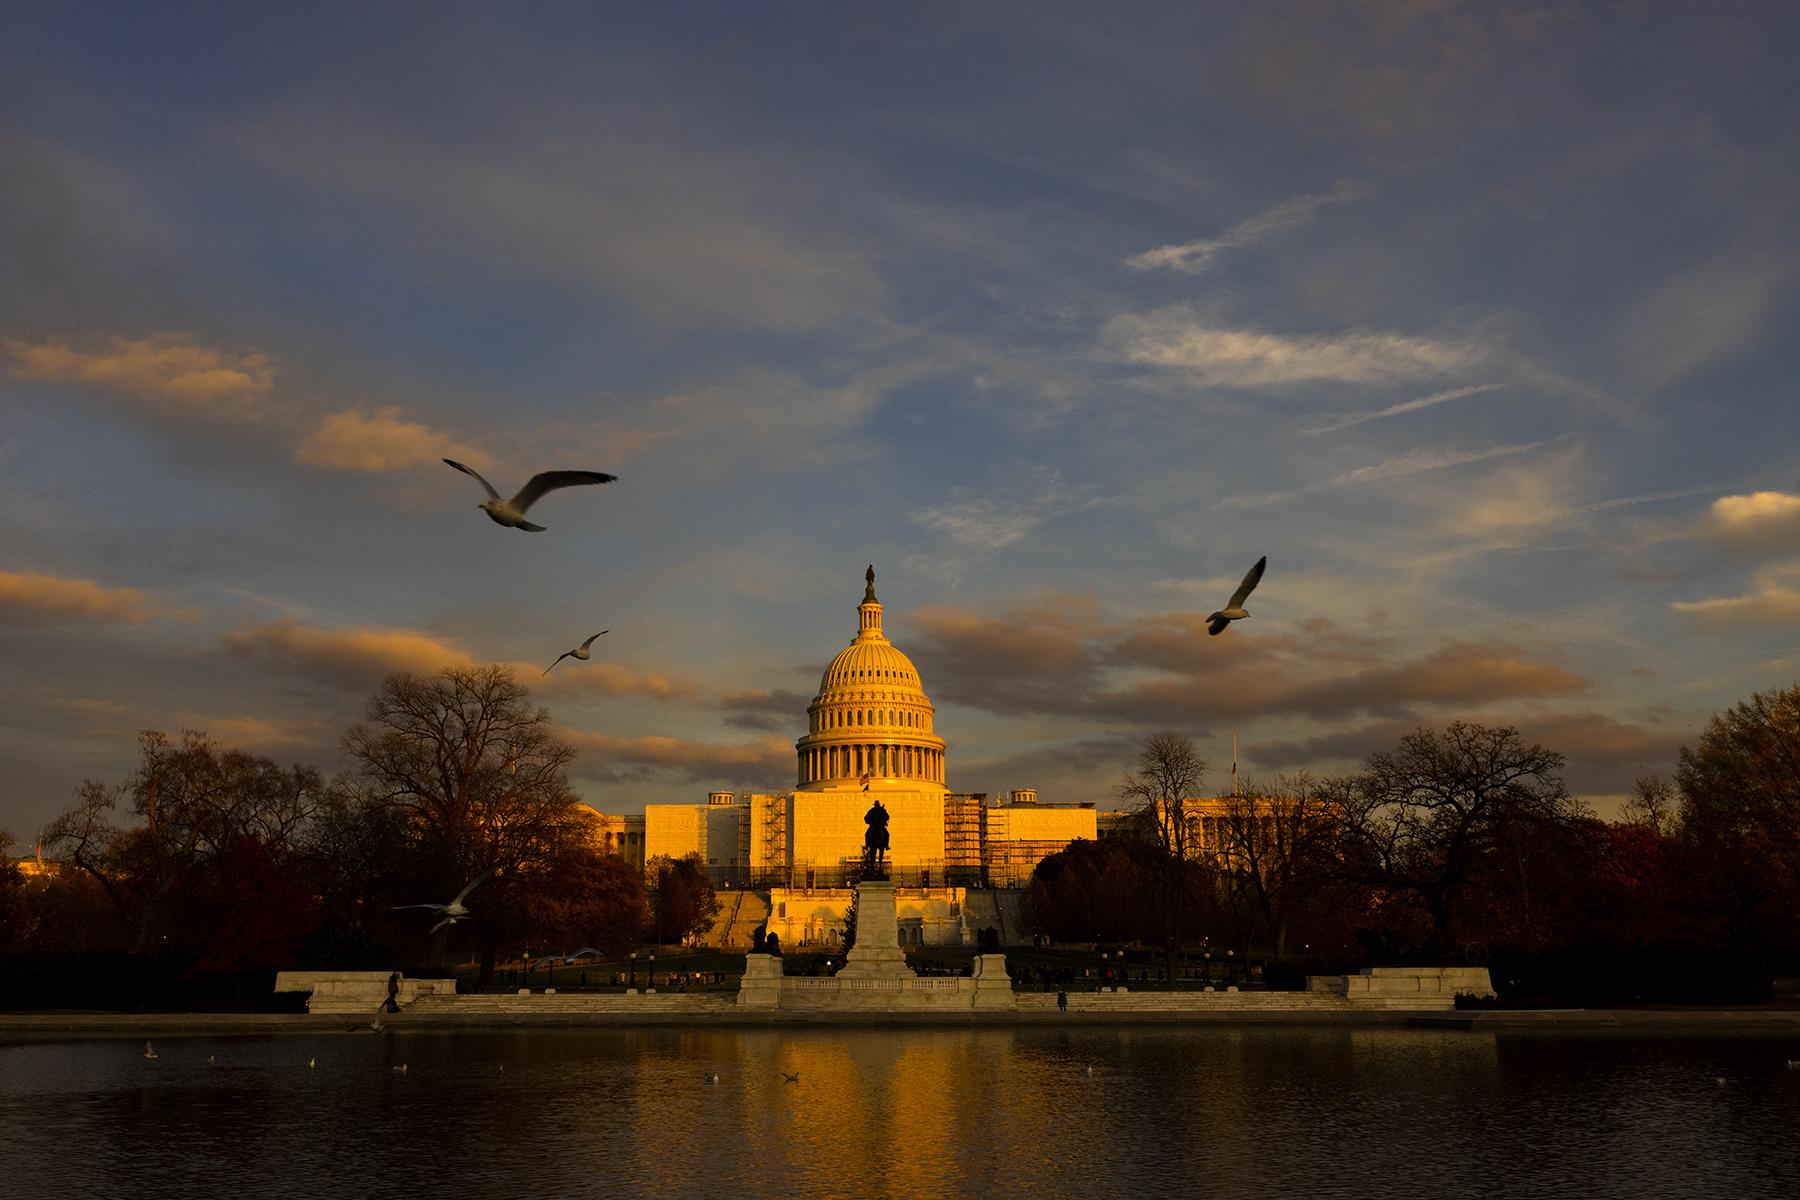 35 Views of the Capitol - The U.S. Capitol Building at sunset on November 19, 2022.